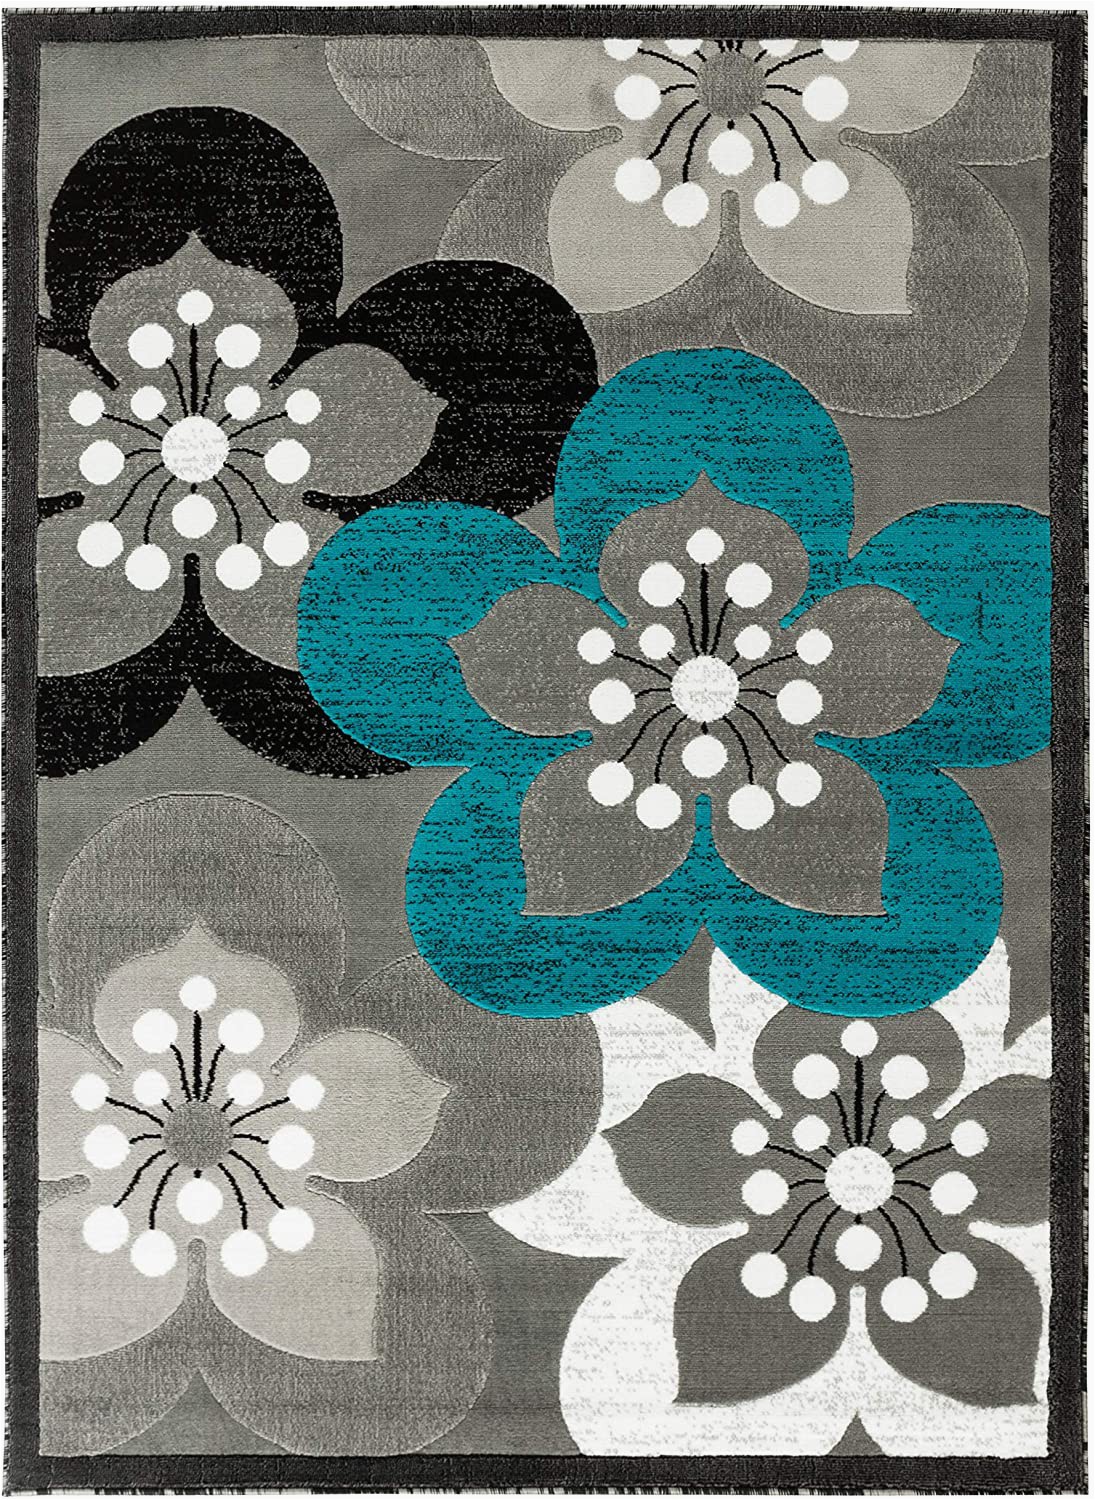 Blue and White Floral Rug Rugs and Decor Newport Collection Style 81 Teal Black Grey White Modern Floral area Rugs 5 1 X 7 2